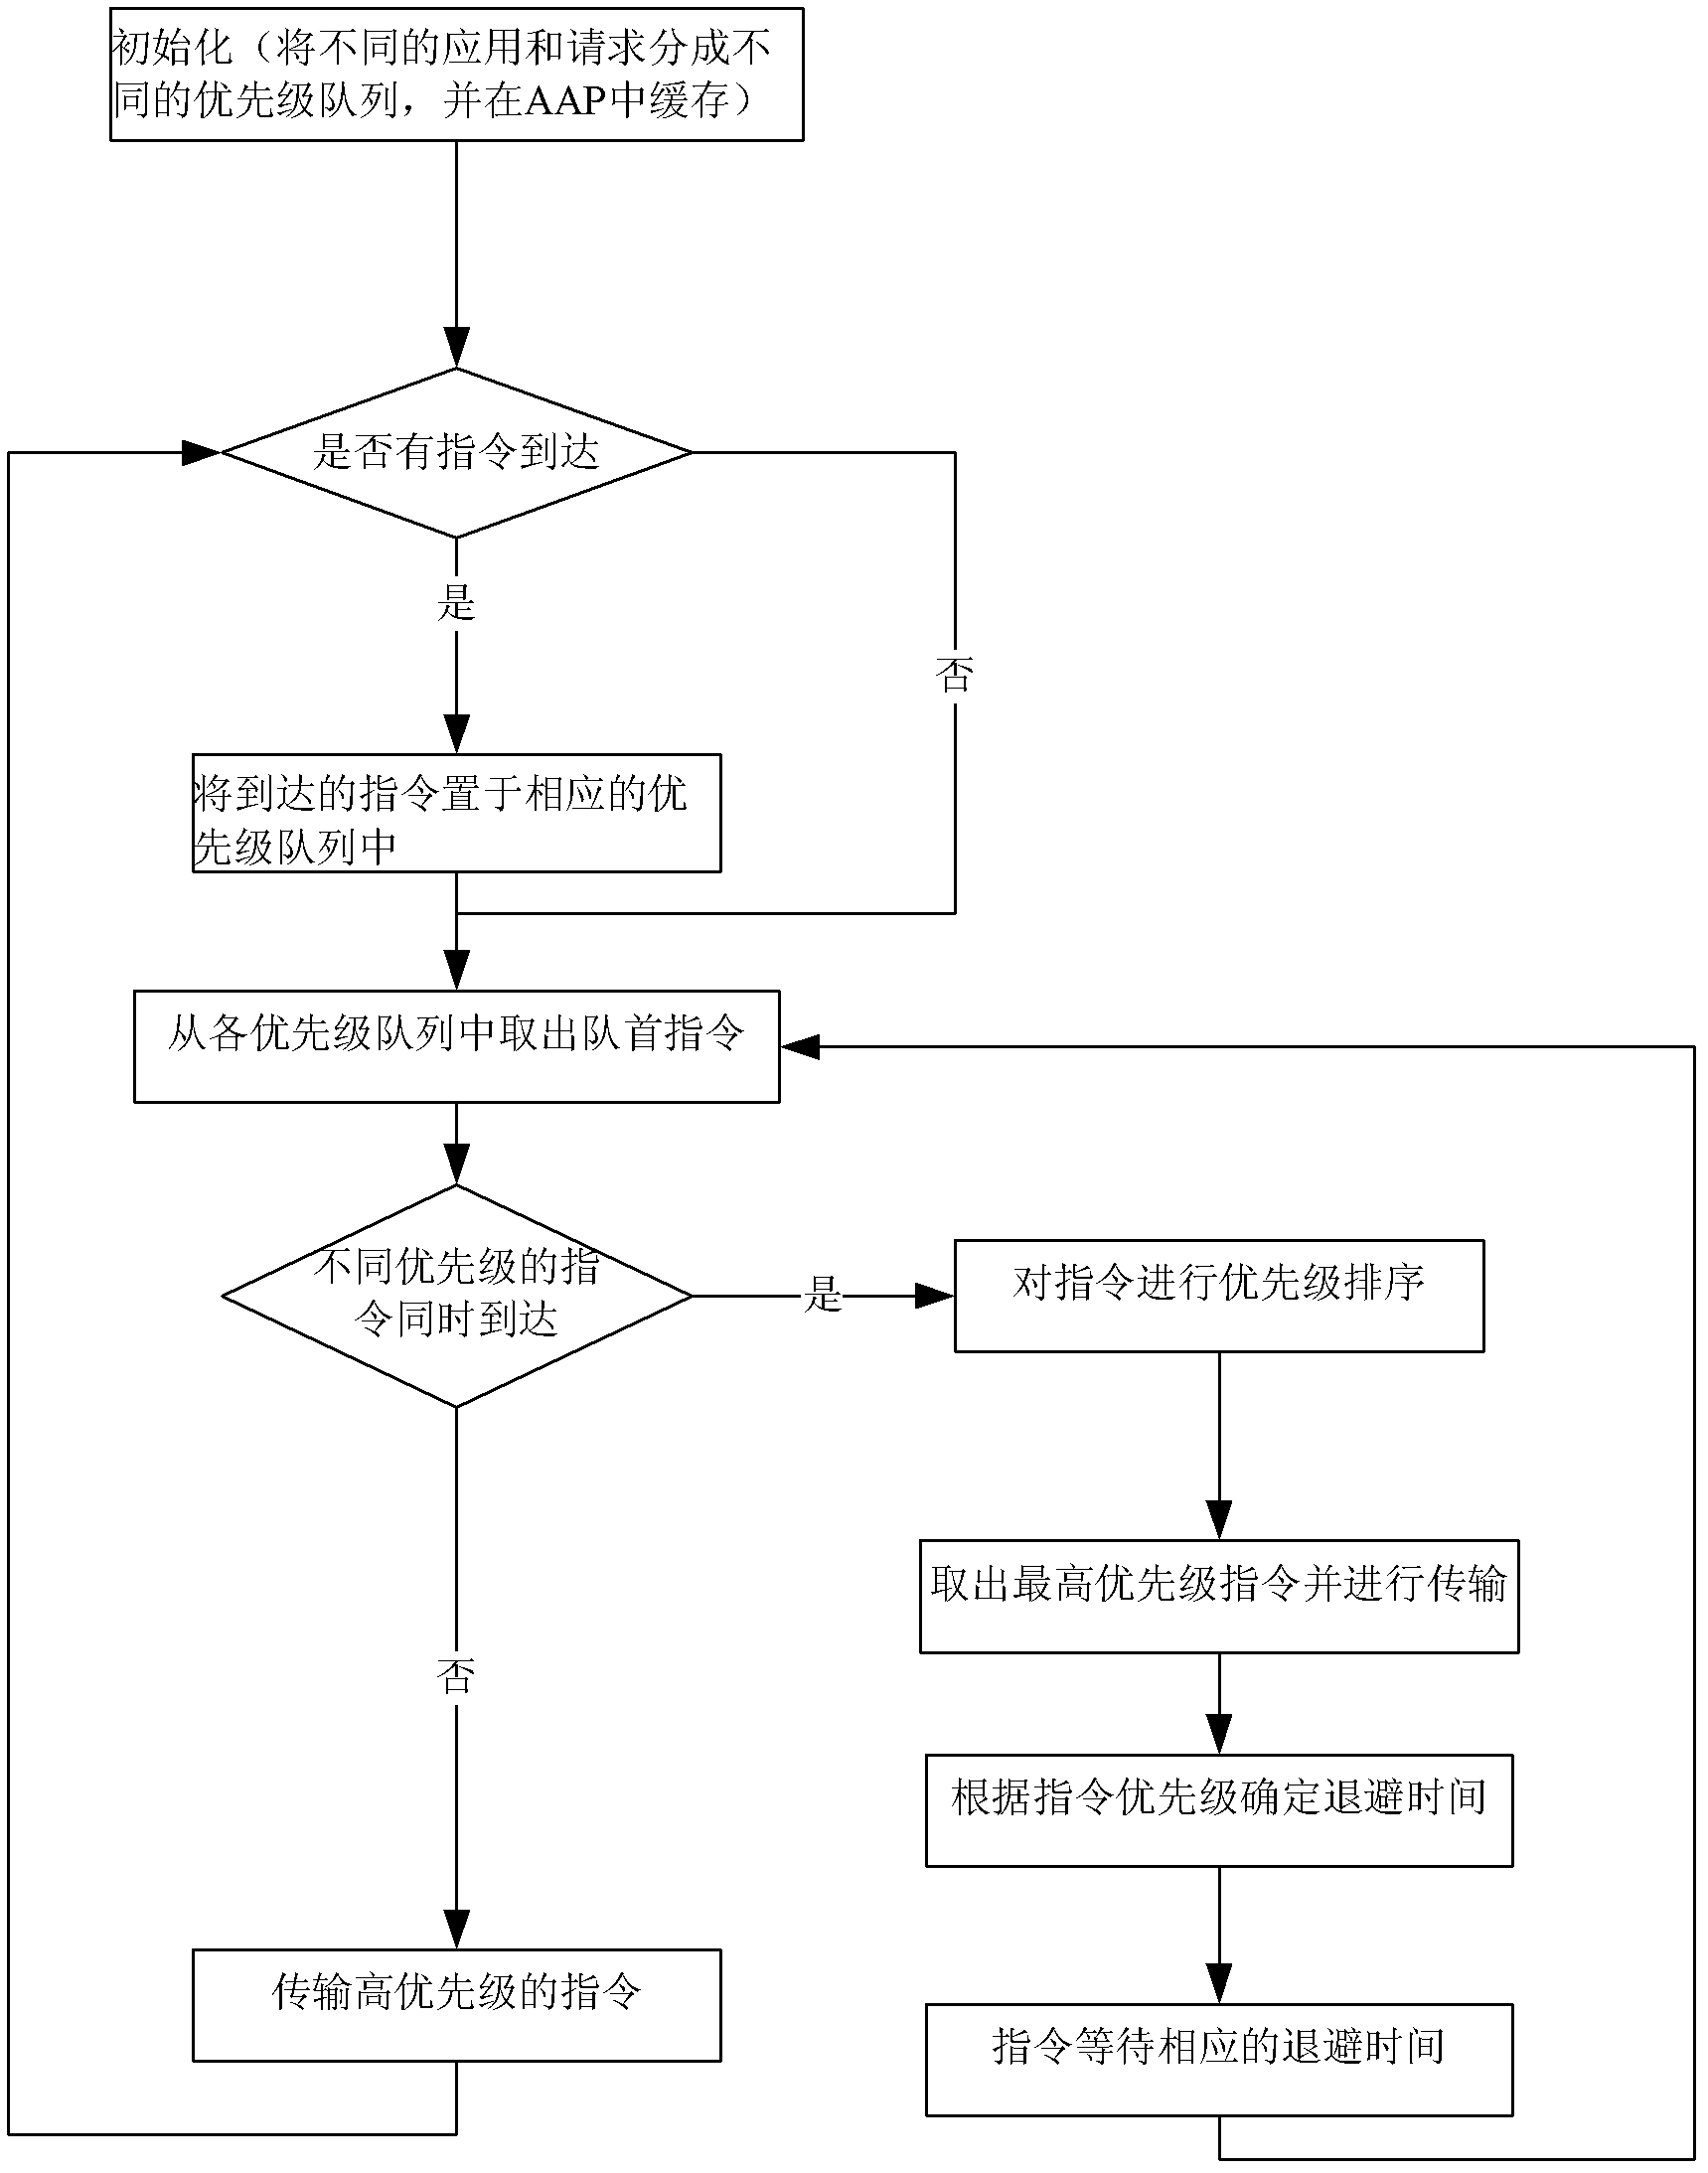 Method for realizing digital home network control technology